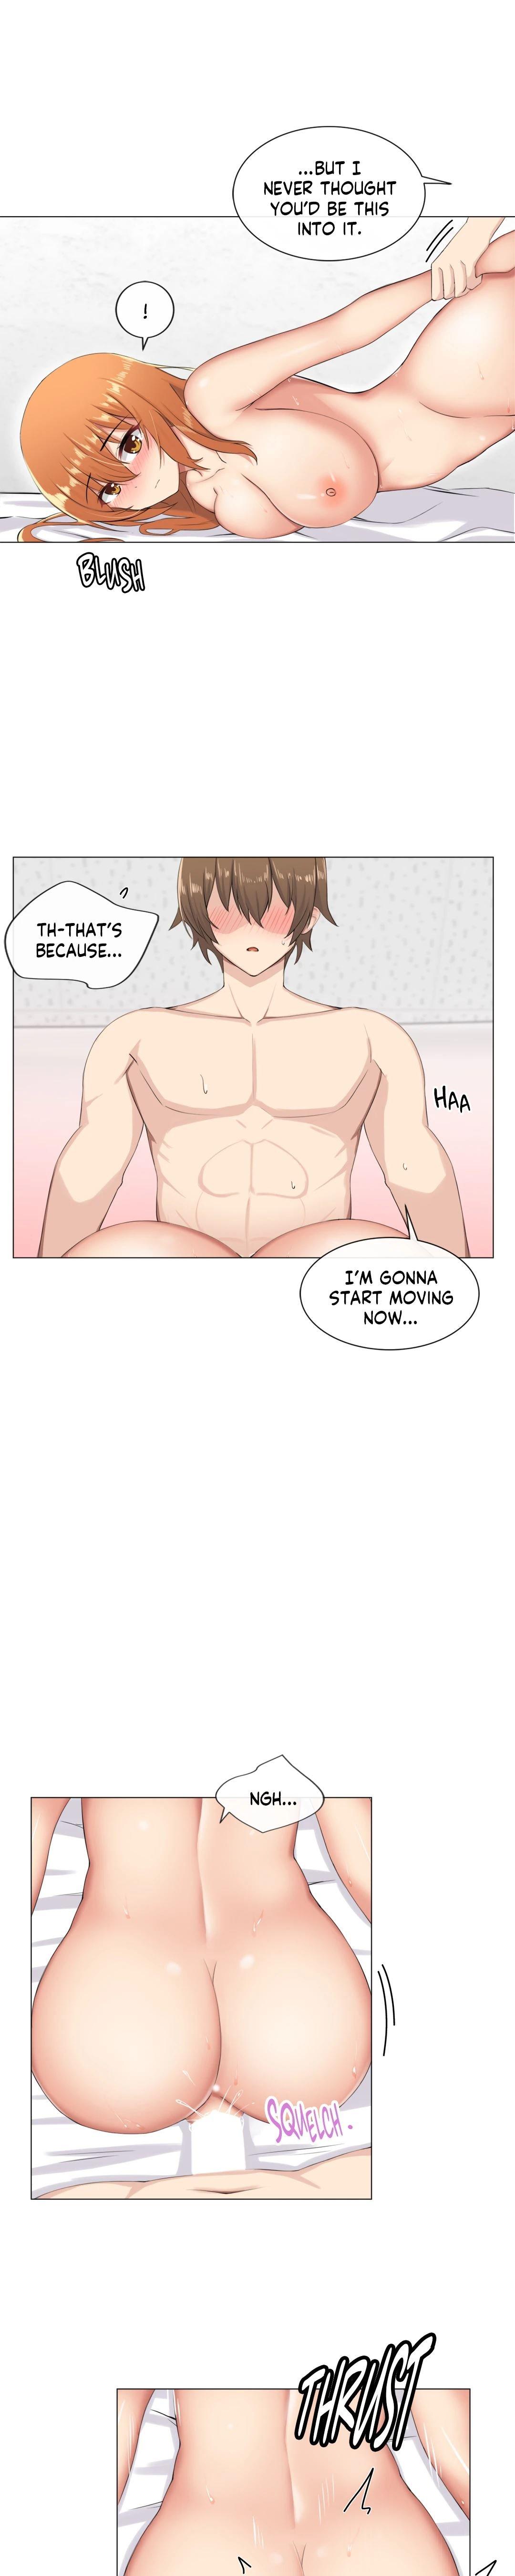 [Dumangoon, 130F] Sexcape Room: Pile Up Ch.9/9 [English] [Manhwa PDF] Completed 170